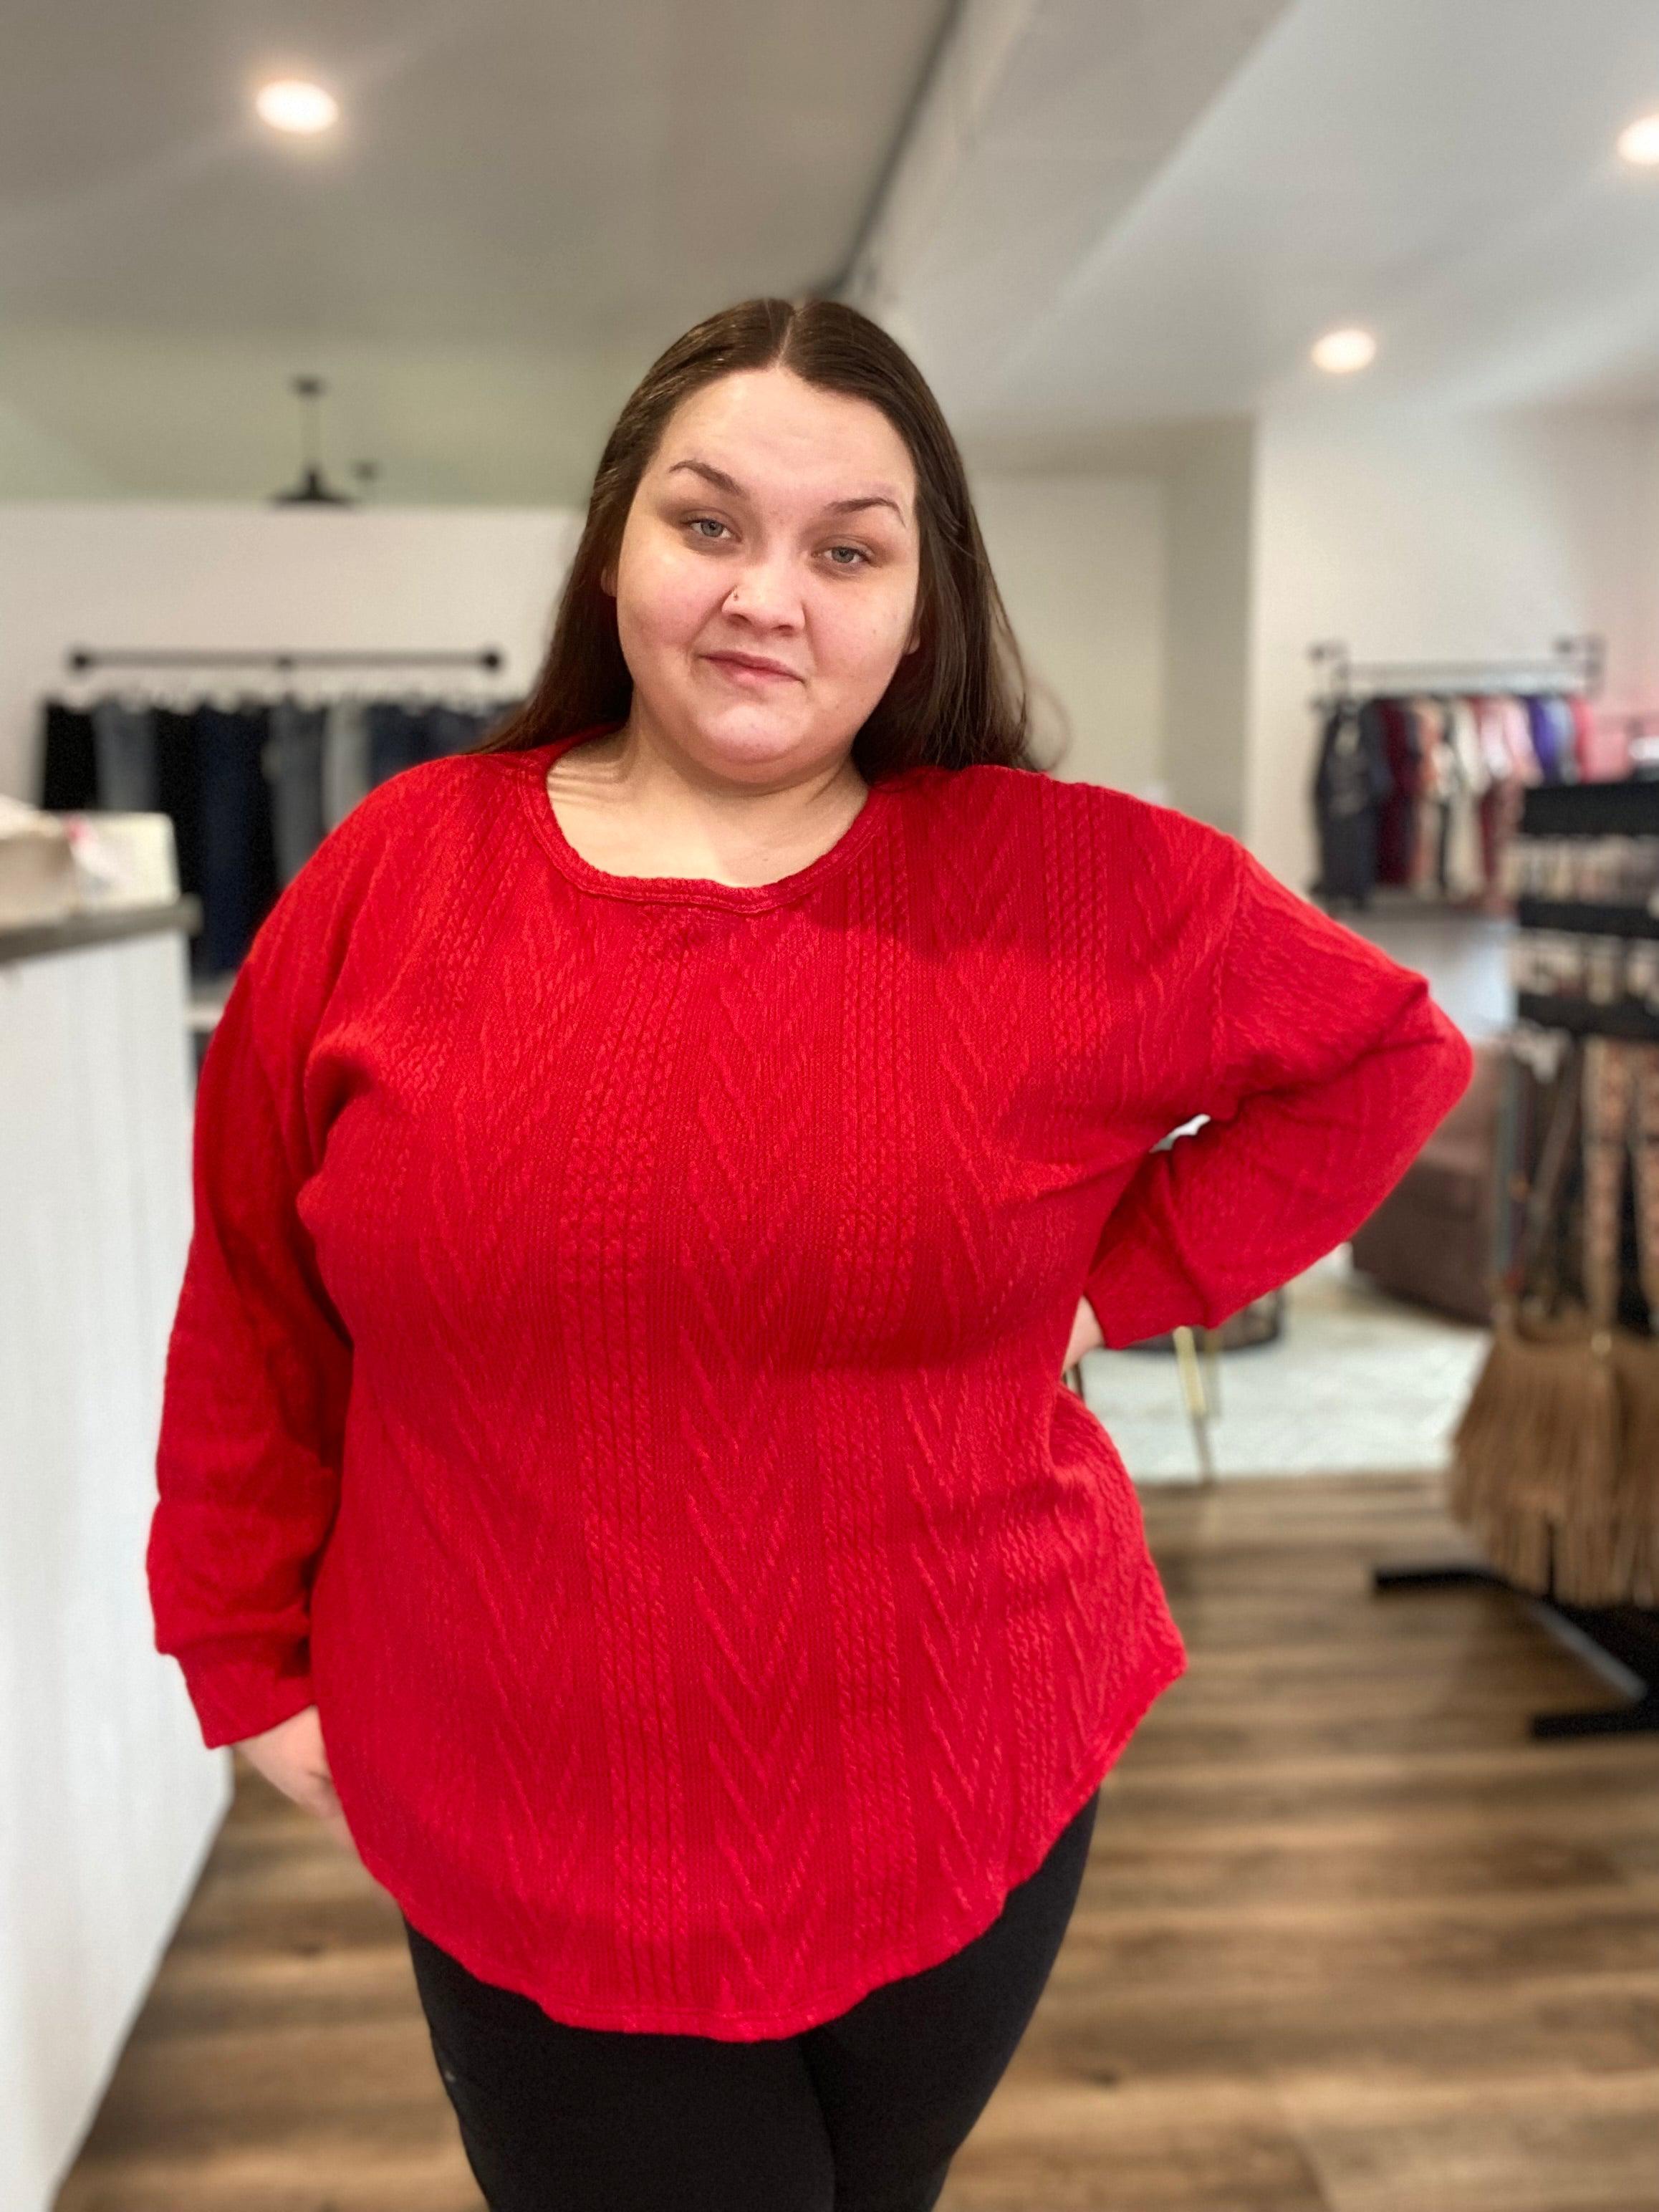 Shop Meri Cable Knit Sweater-Sweater at Ruby Joy Boutique, a Women's Clothing Store in Pickerington, Ohio